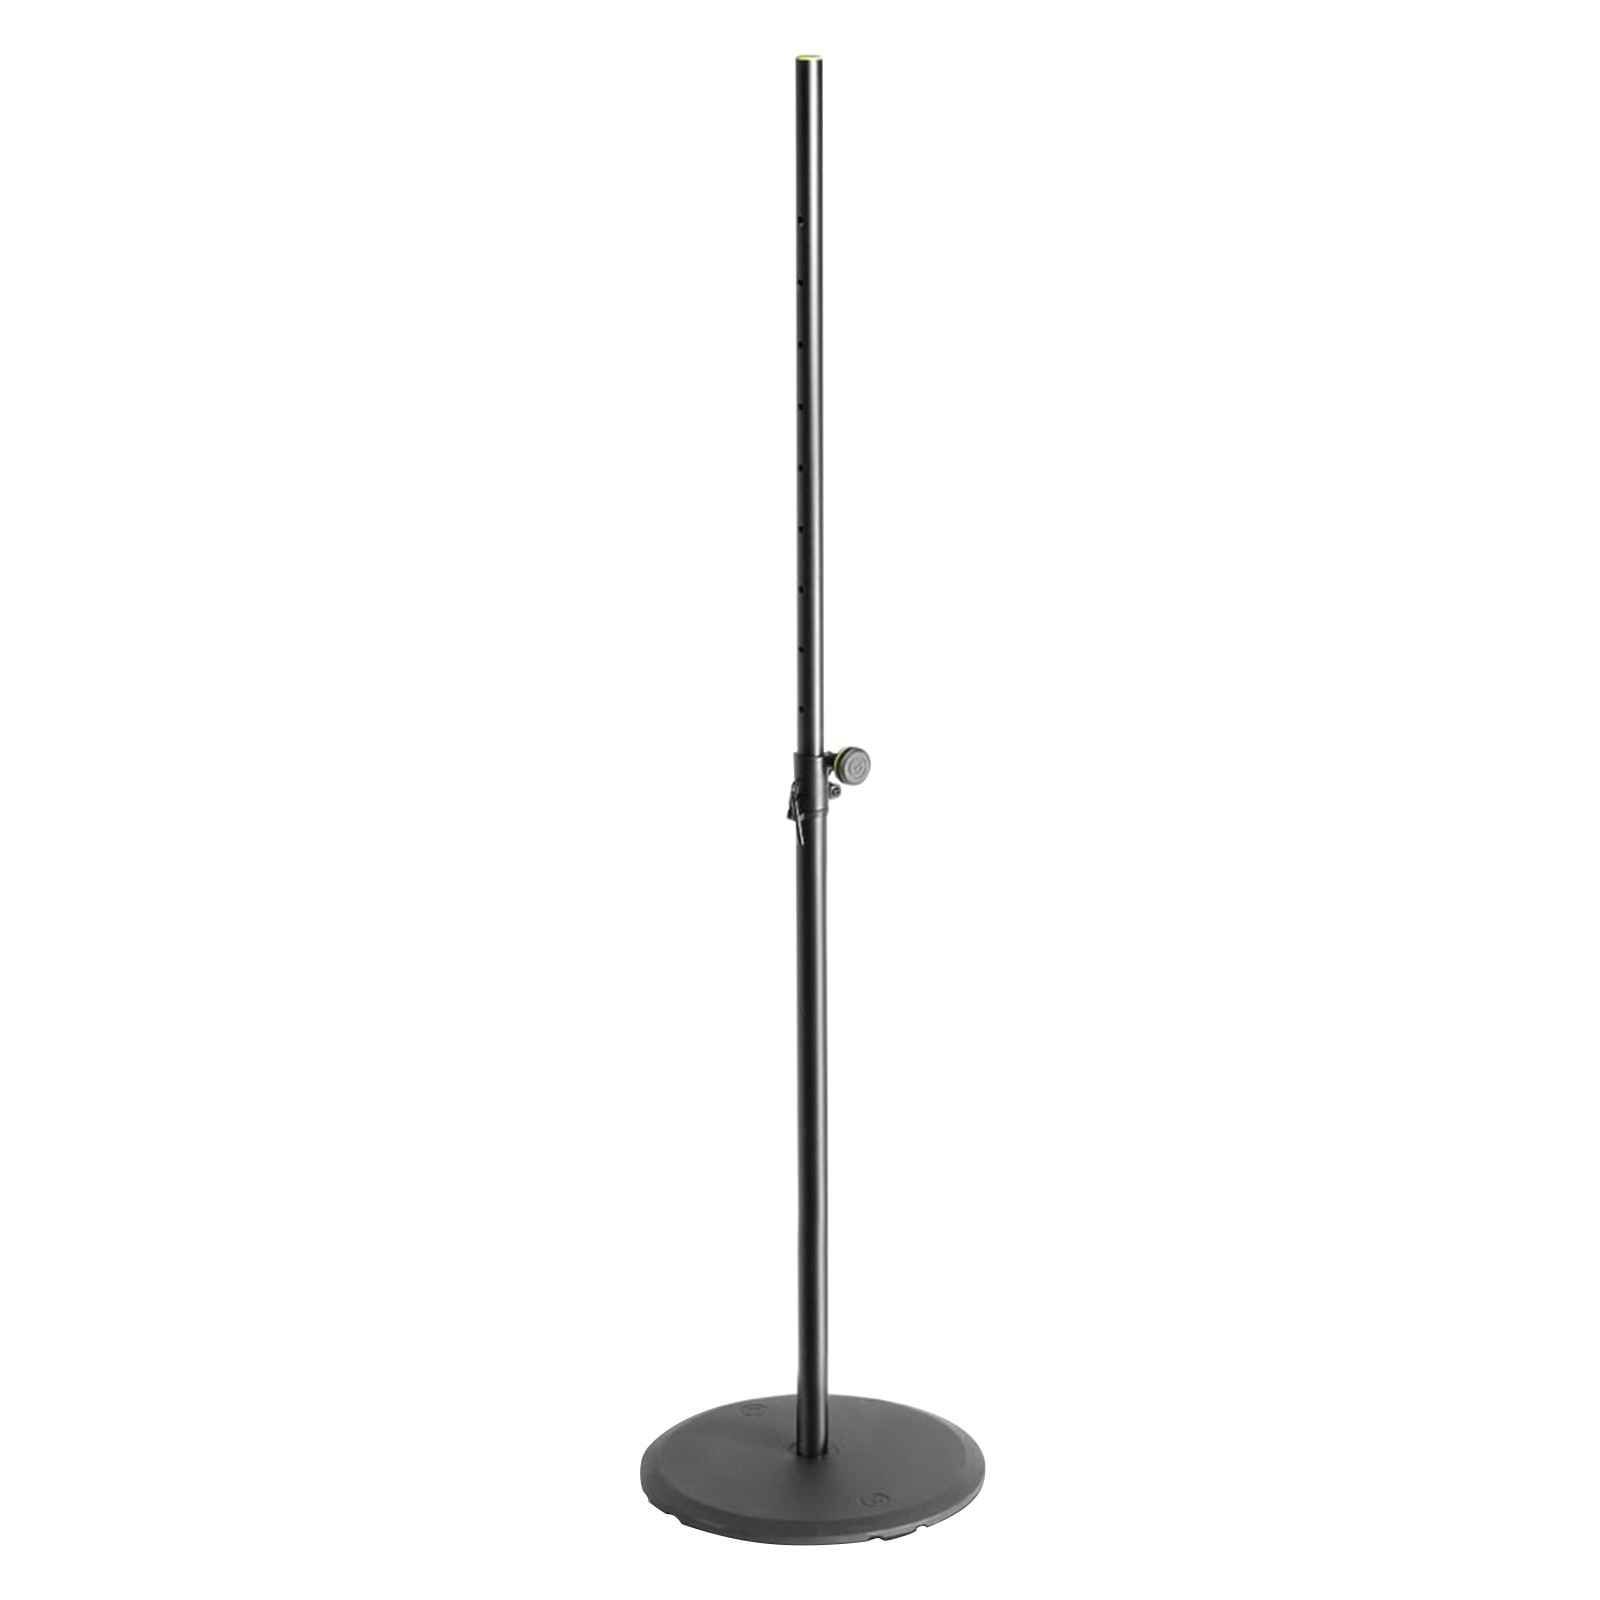 gravity-stands-gsspwbset1---sspeaker-stand-with-base-and-cast-iron-weight-plate.jpeg